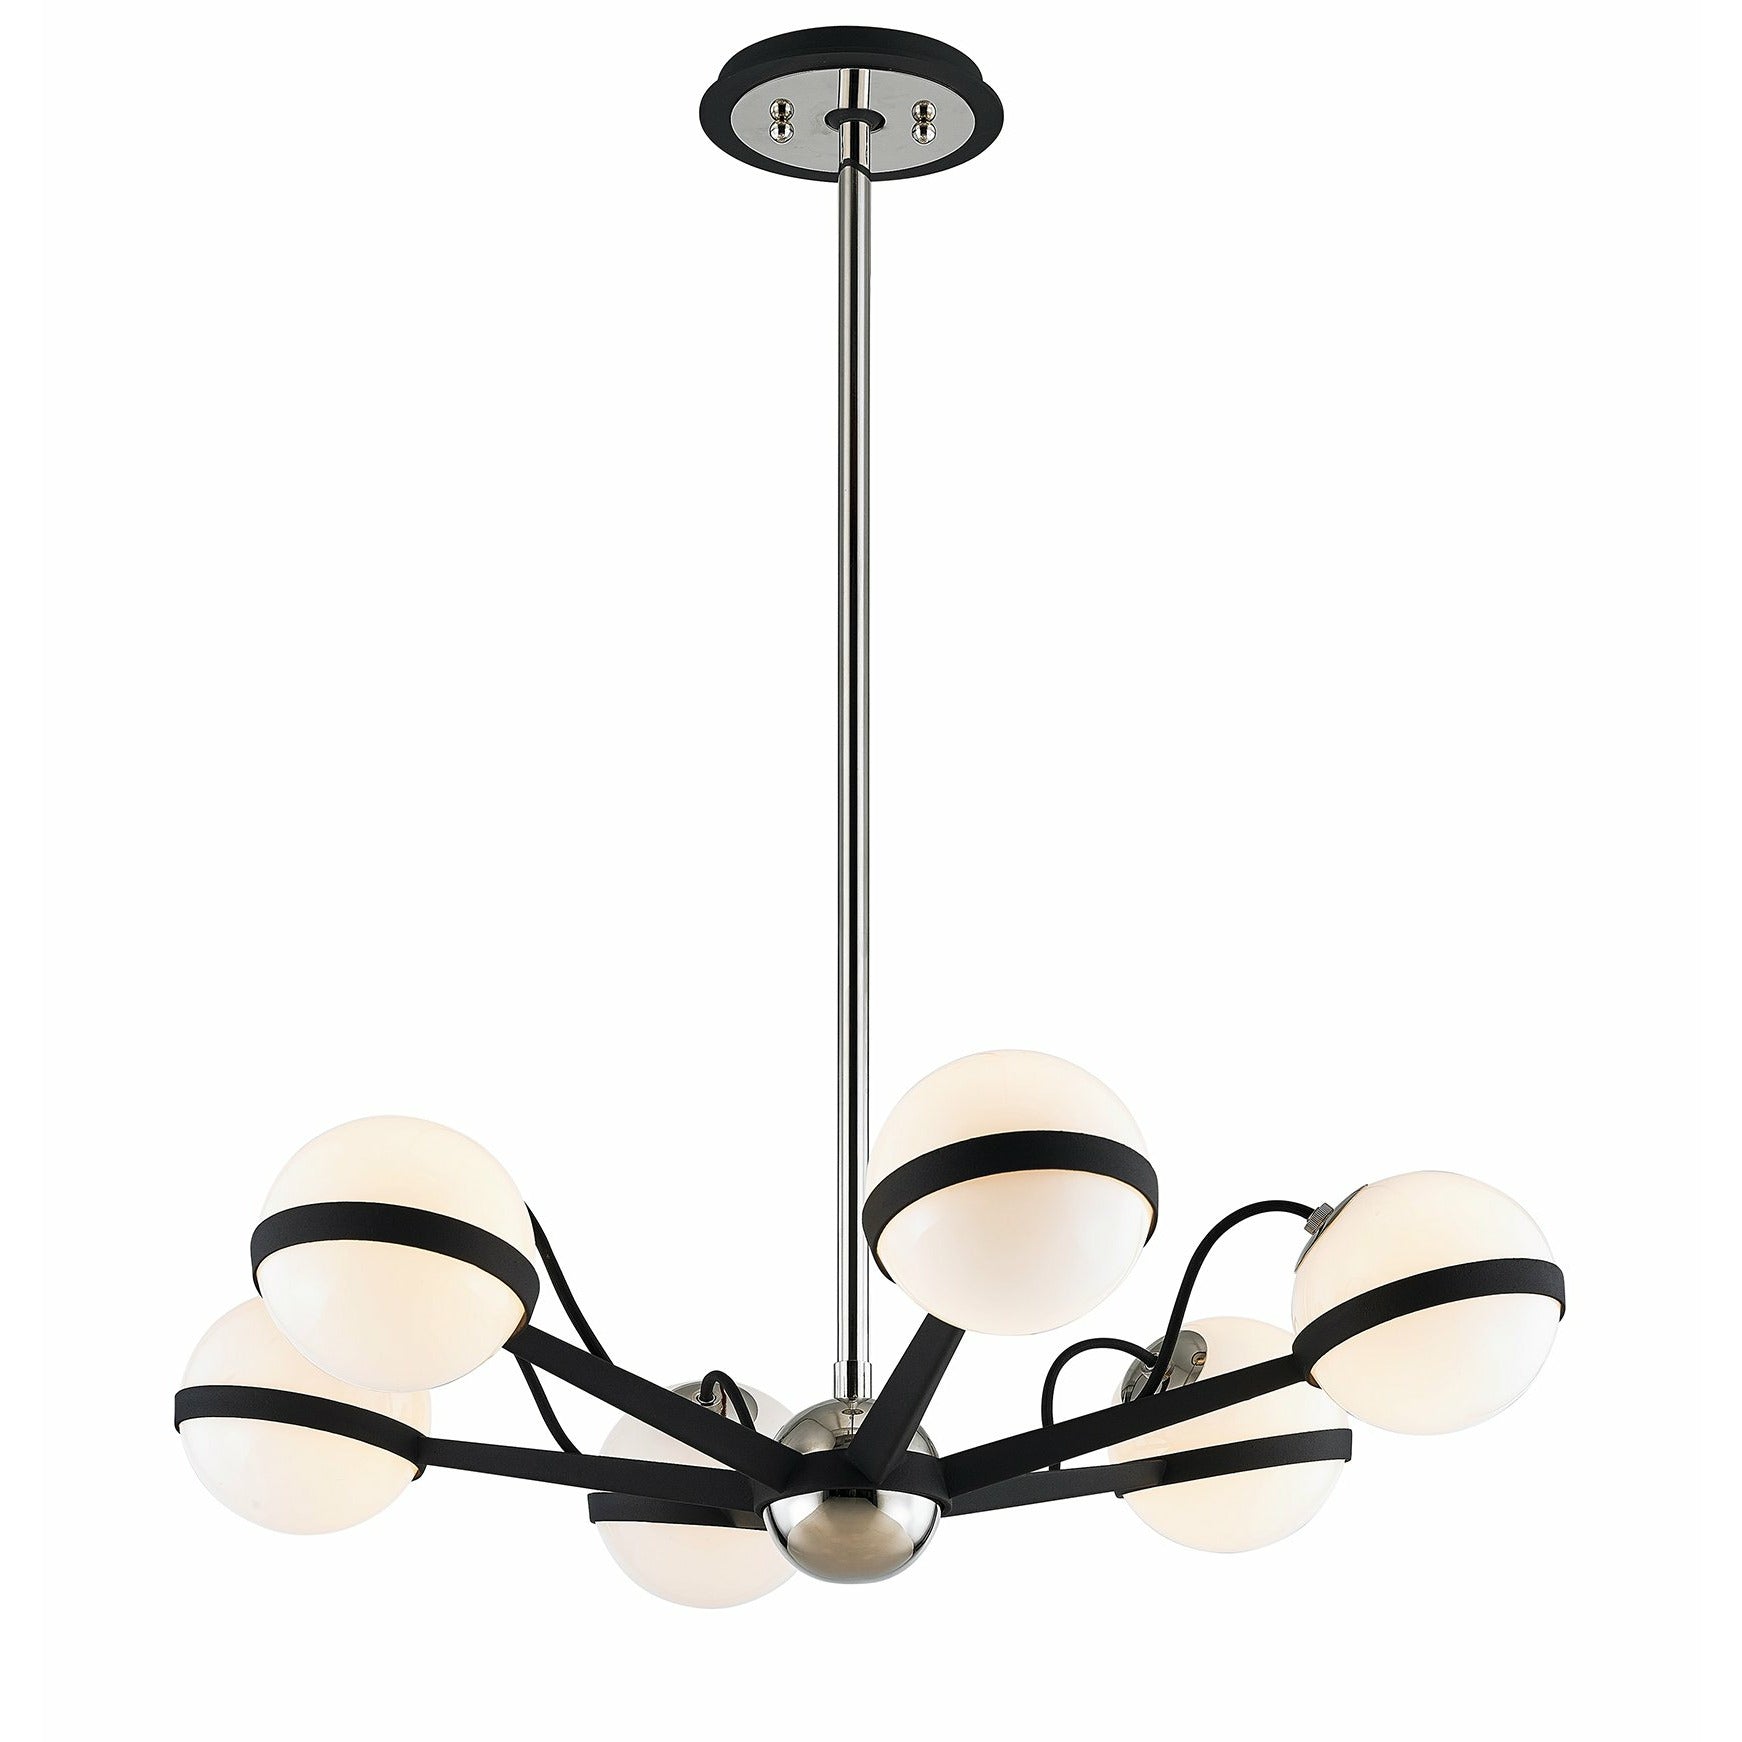 Ace Chandelier Carb Blk W Pol Nickel Accents